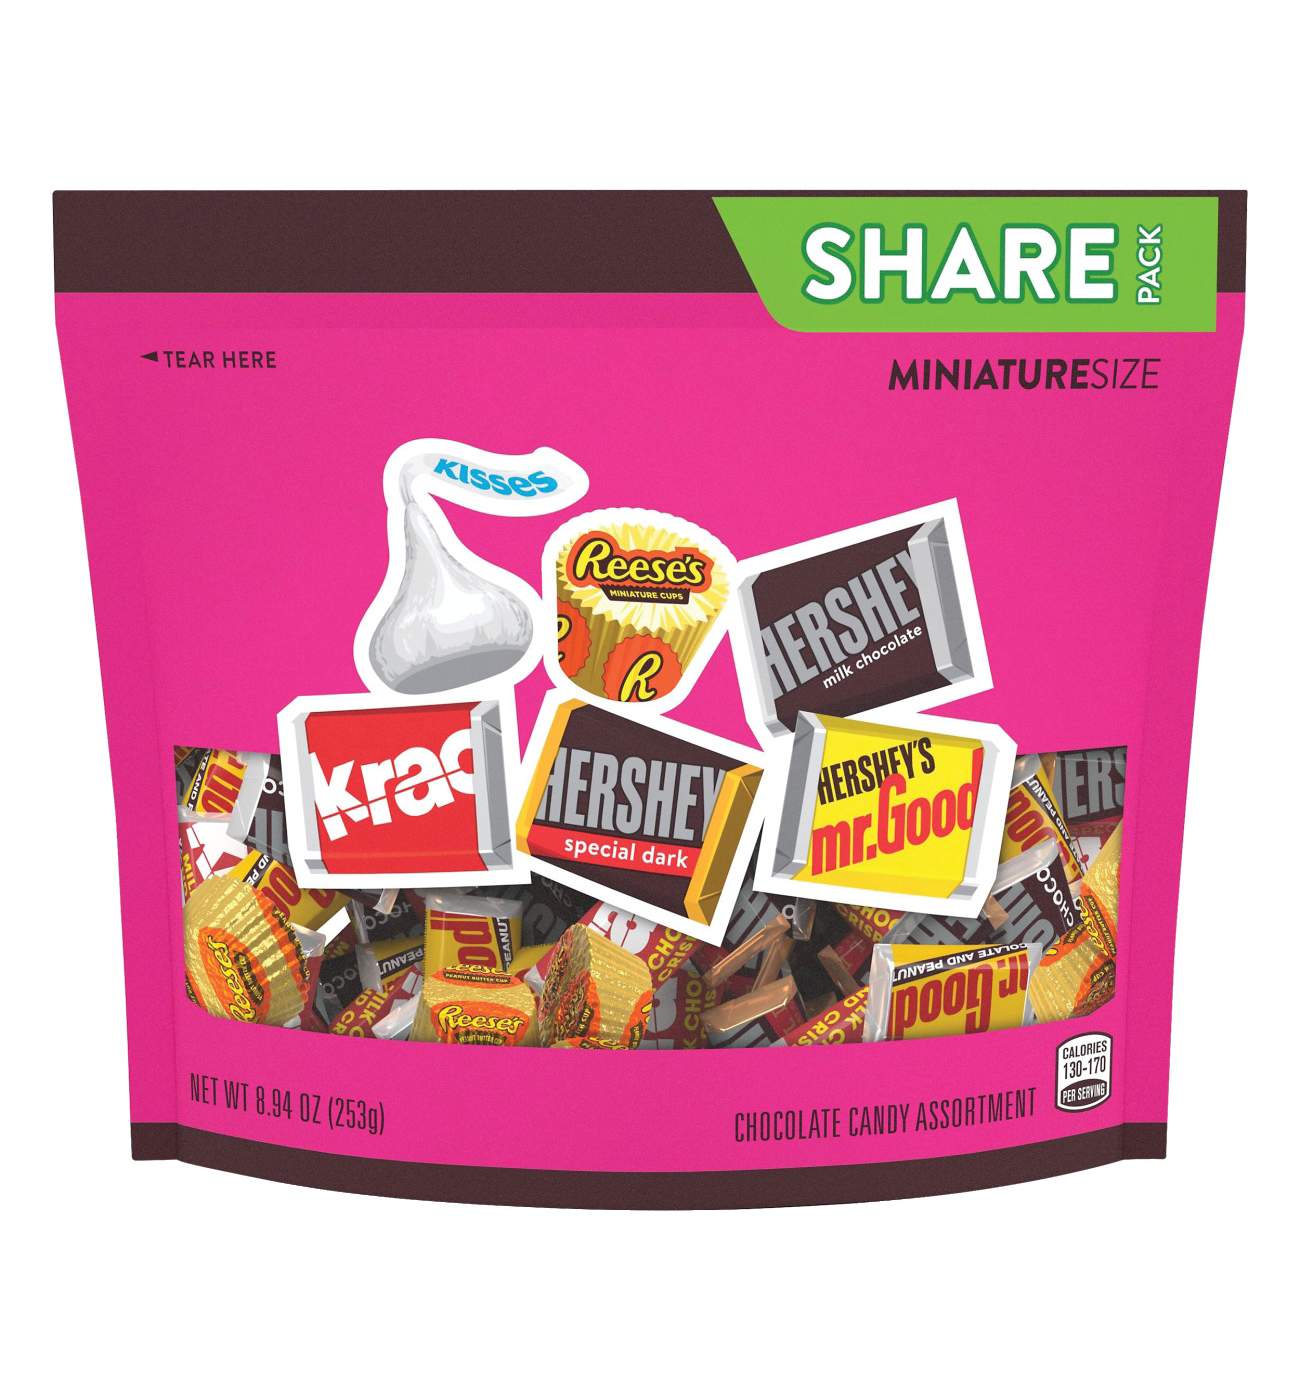 Hershey's Chocolate Candy Assortment Miniature Size Share Pack; image 1 of 2